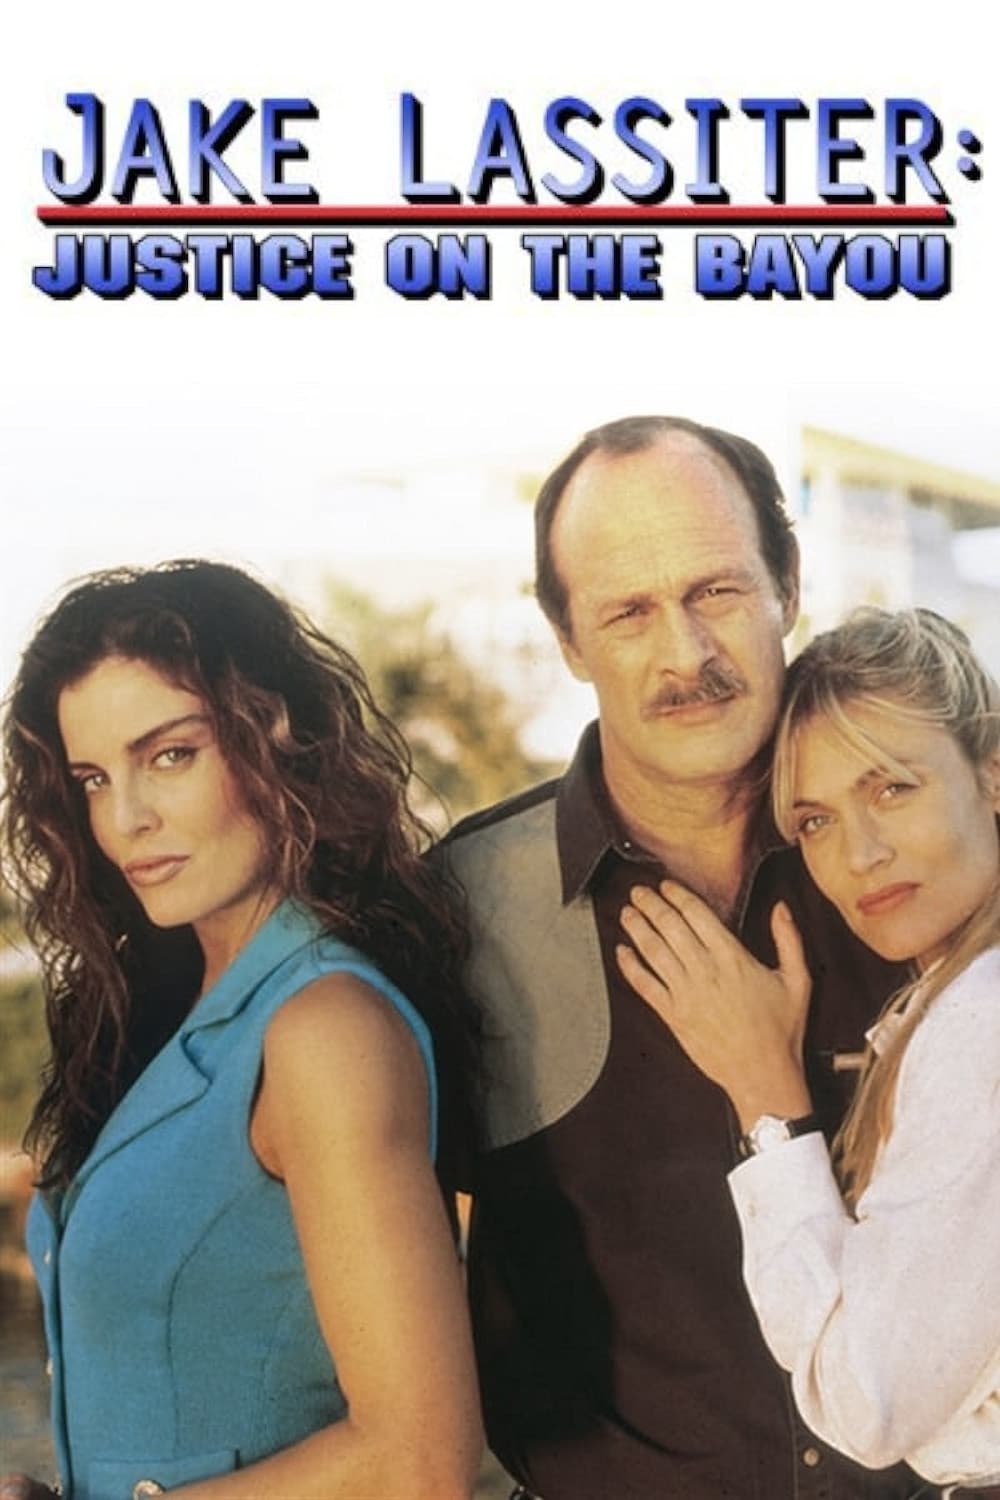 Jake Lassiter: Justice on the Bayou (1995)